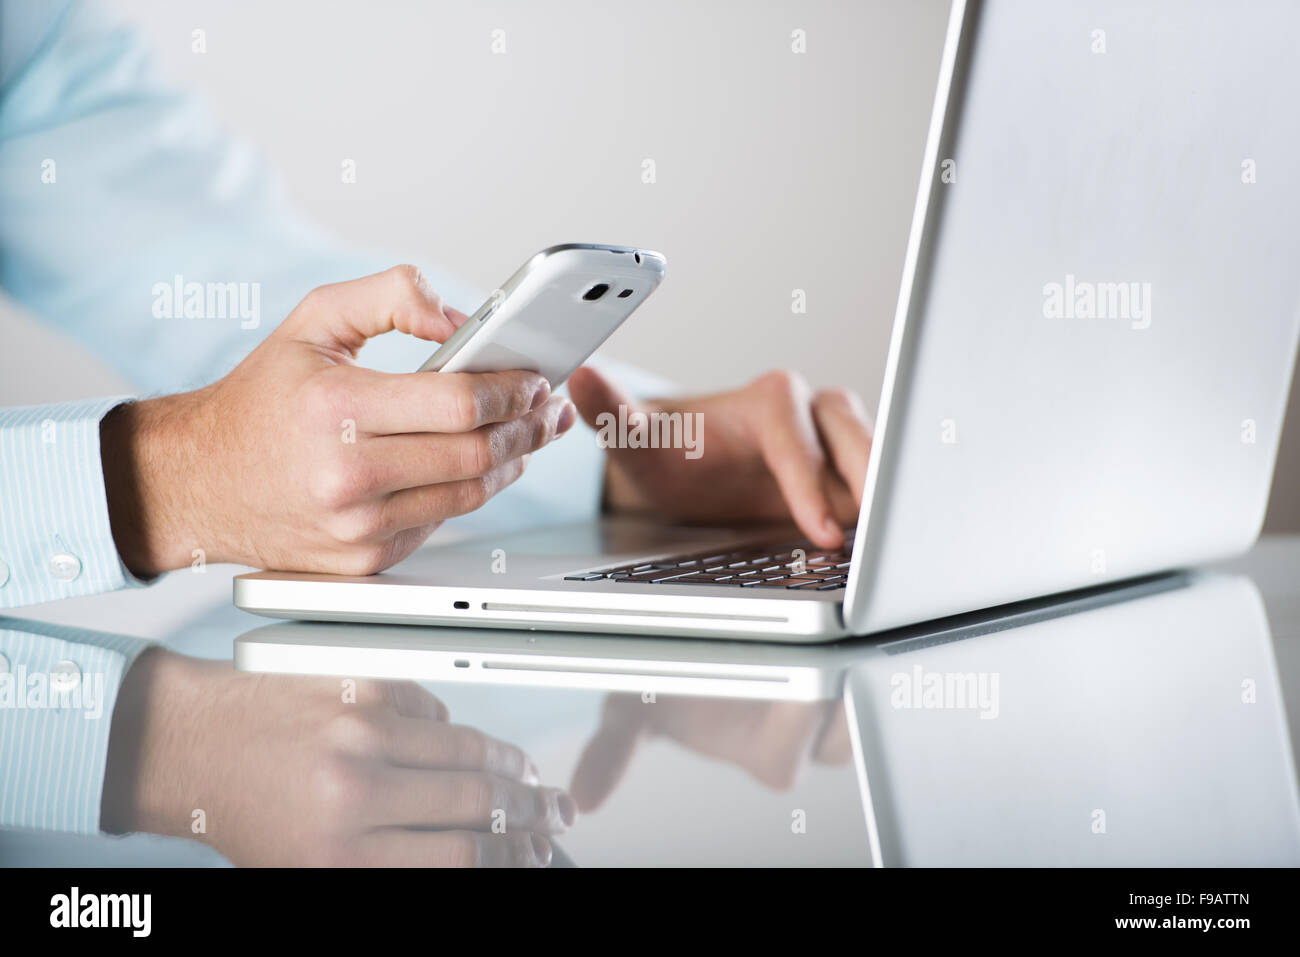 Businessman uses the new media technologies and devices to work successfully Stock Photo